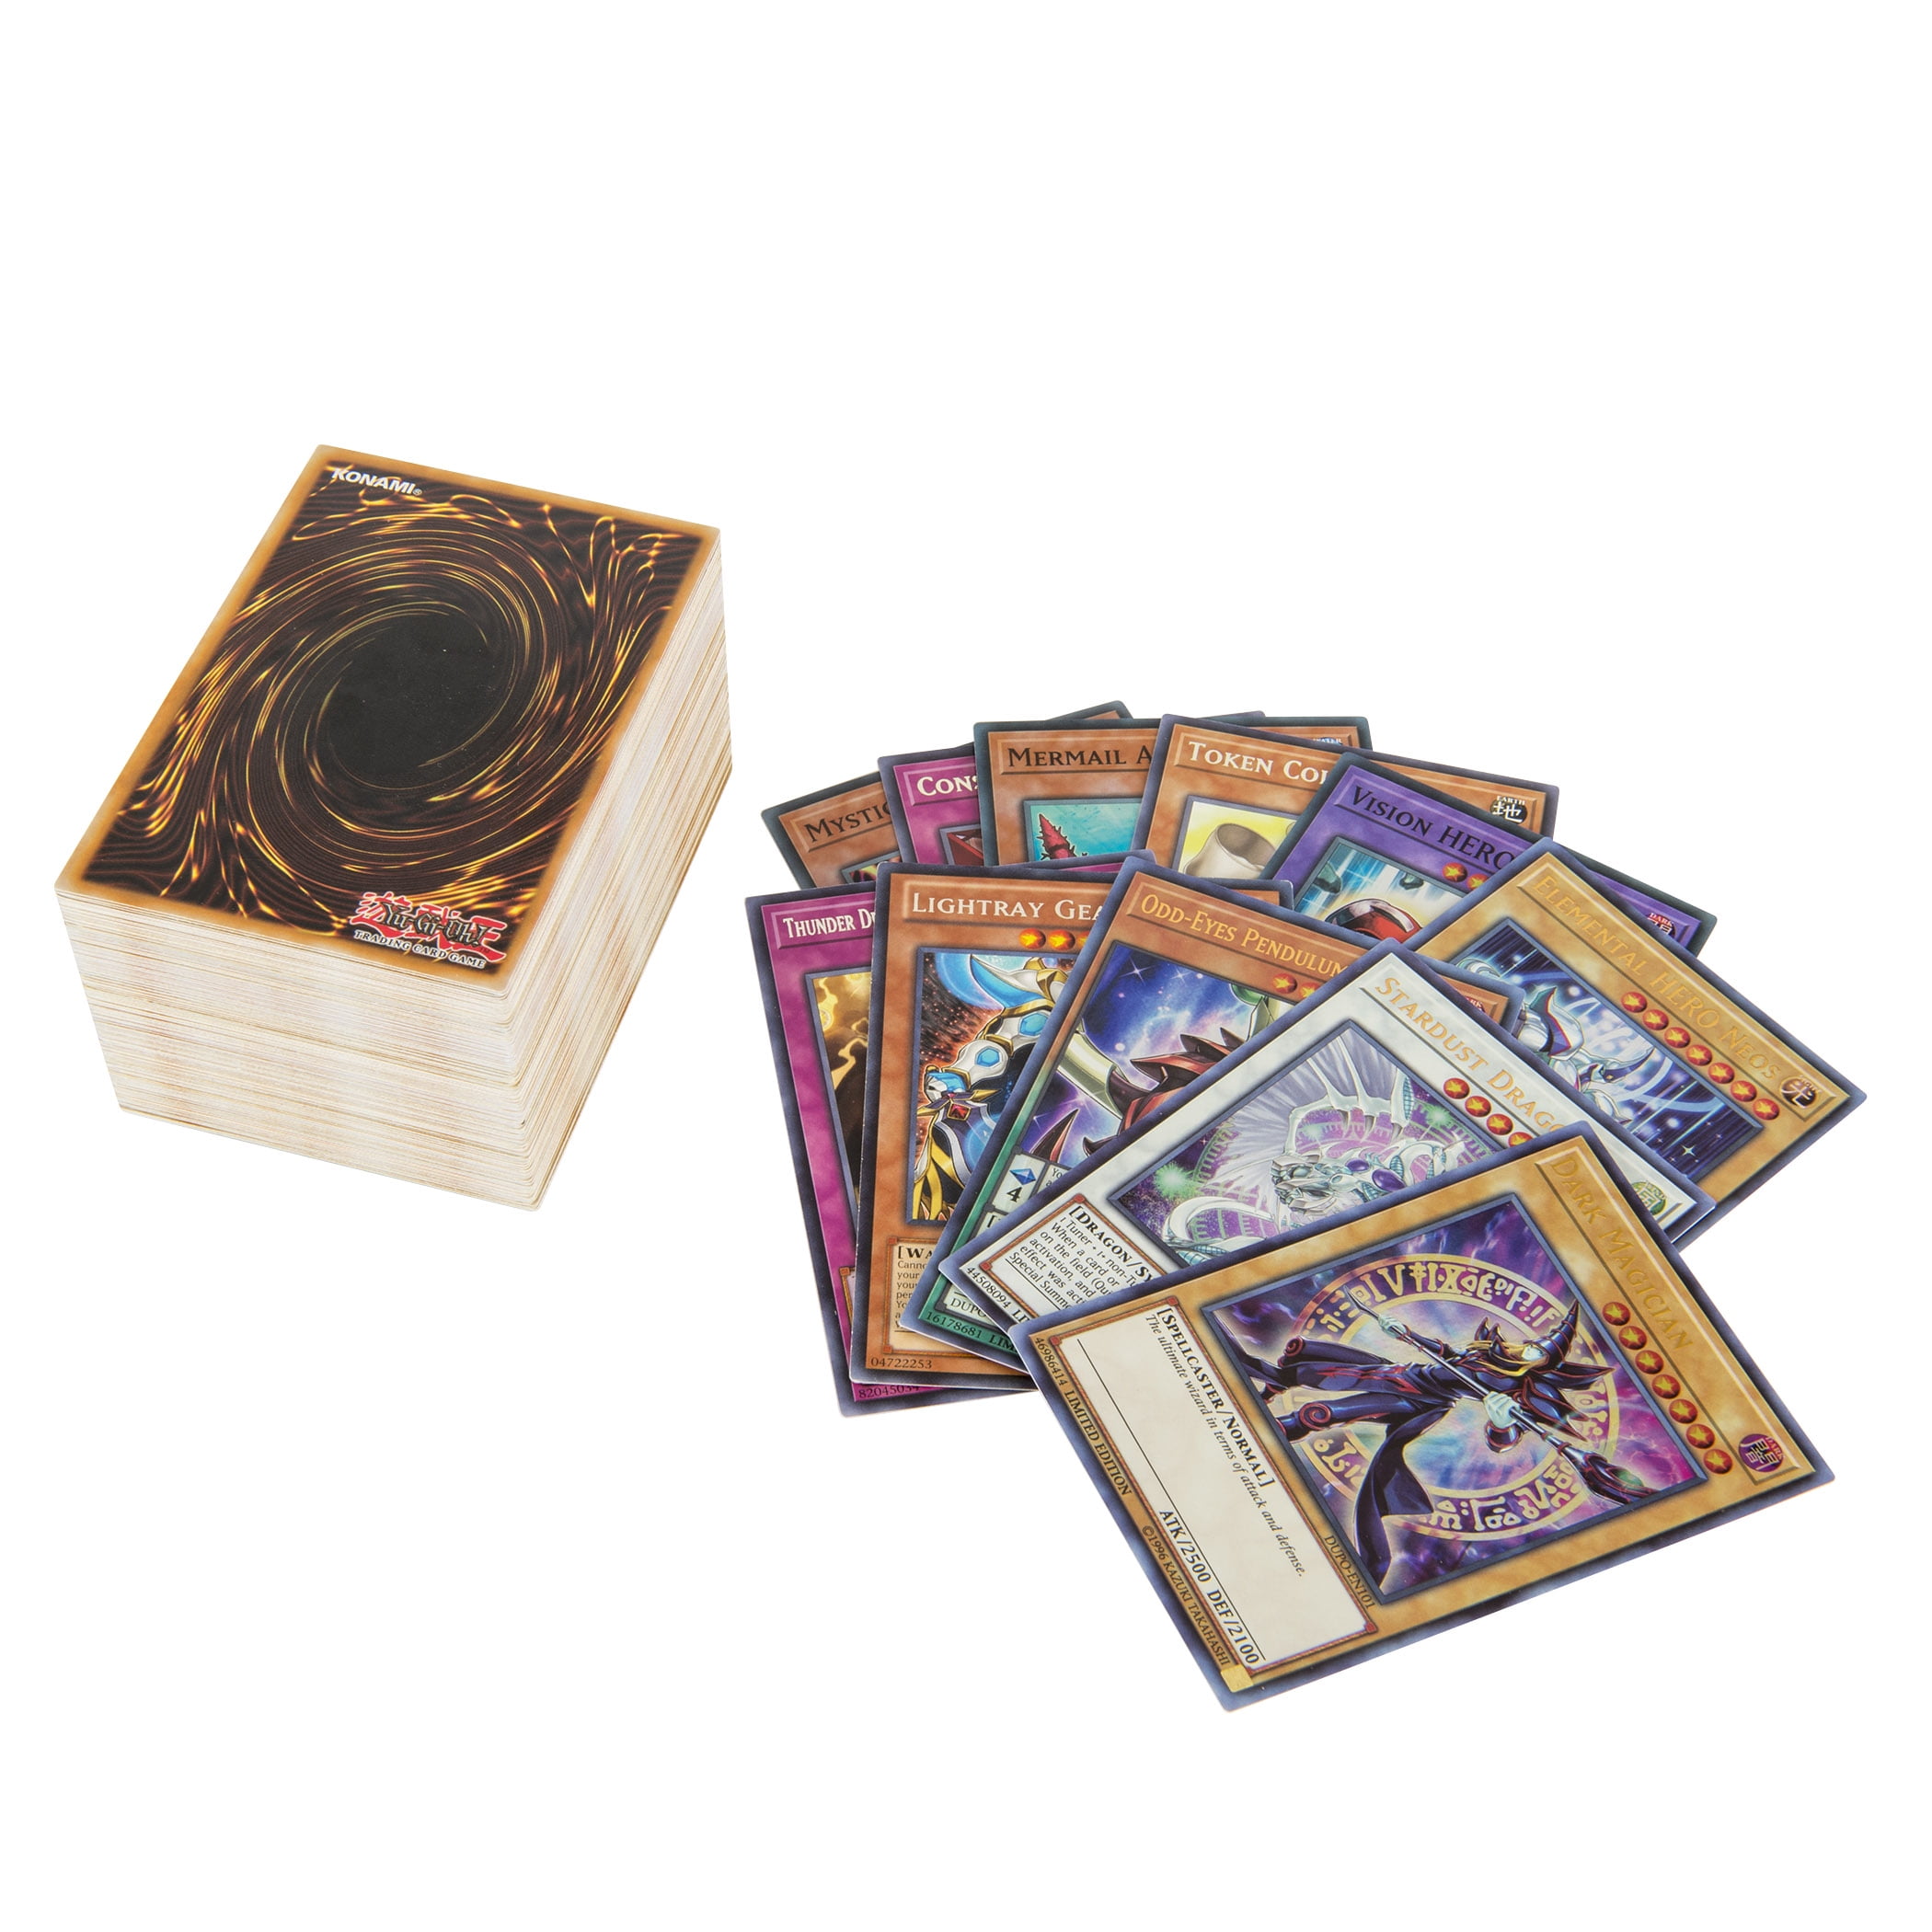 Featuring 90 Commons 5 Rares Yugioh Card Lot of 100 Includes Golden Groundhog Treasure Chest Storage Box! 5 Holo Rares 